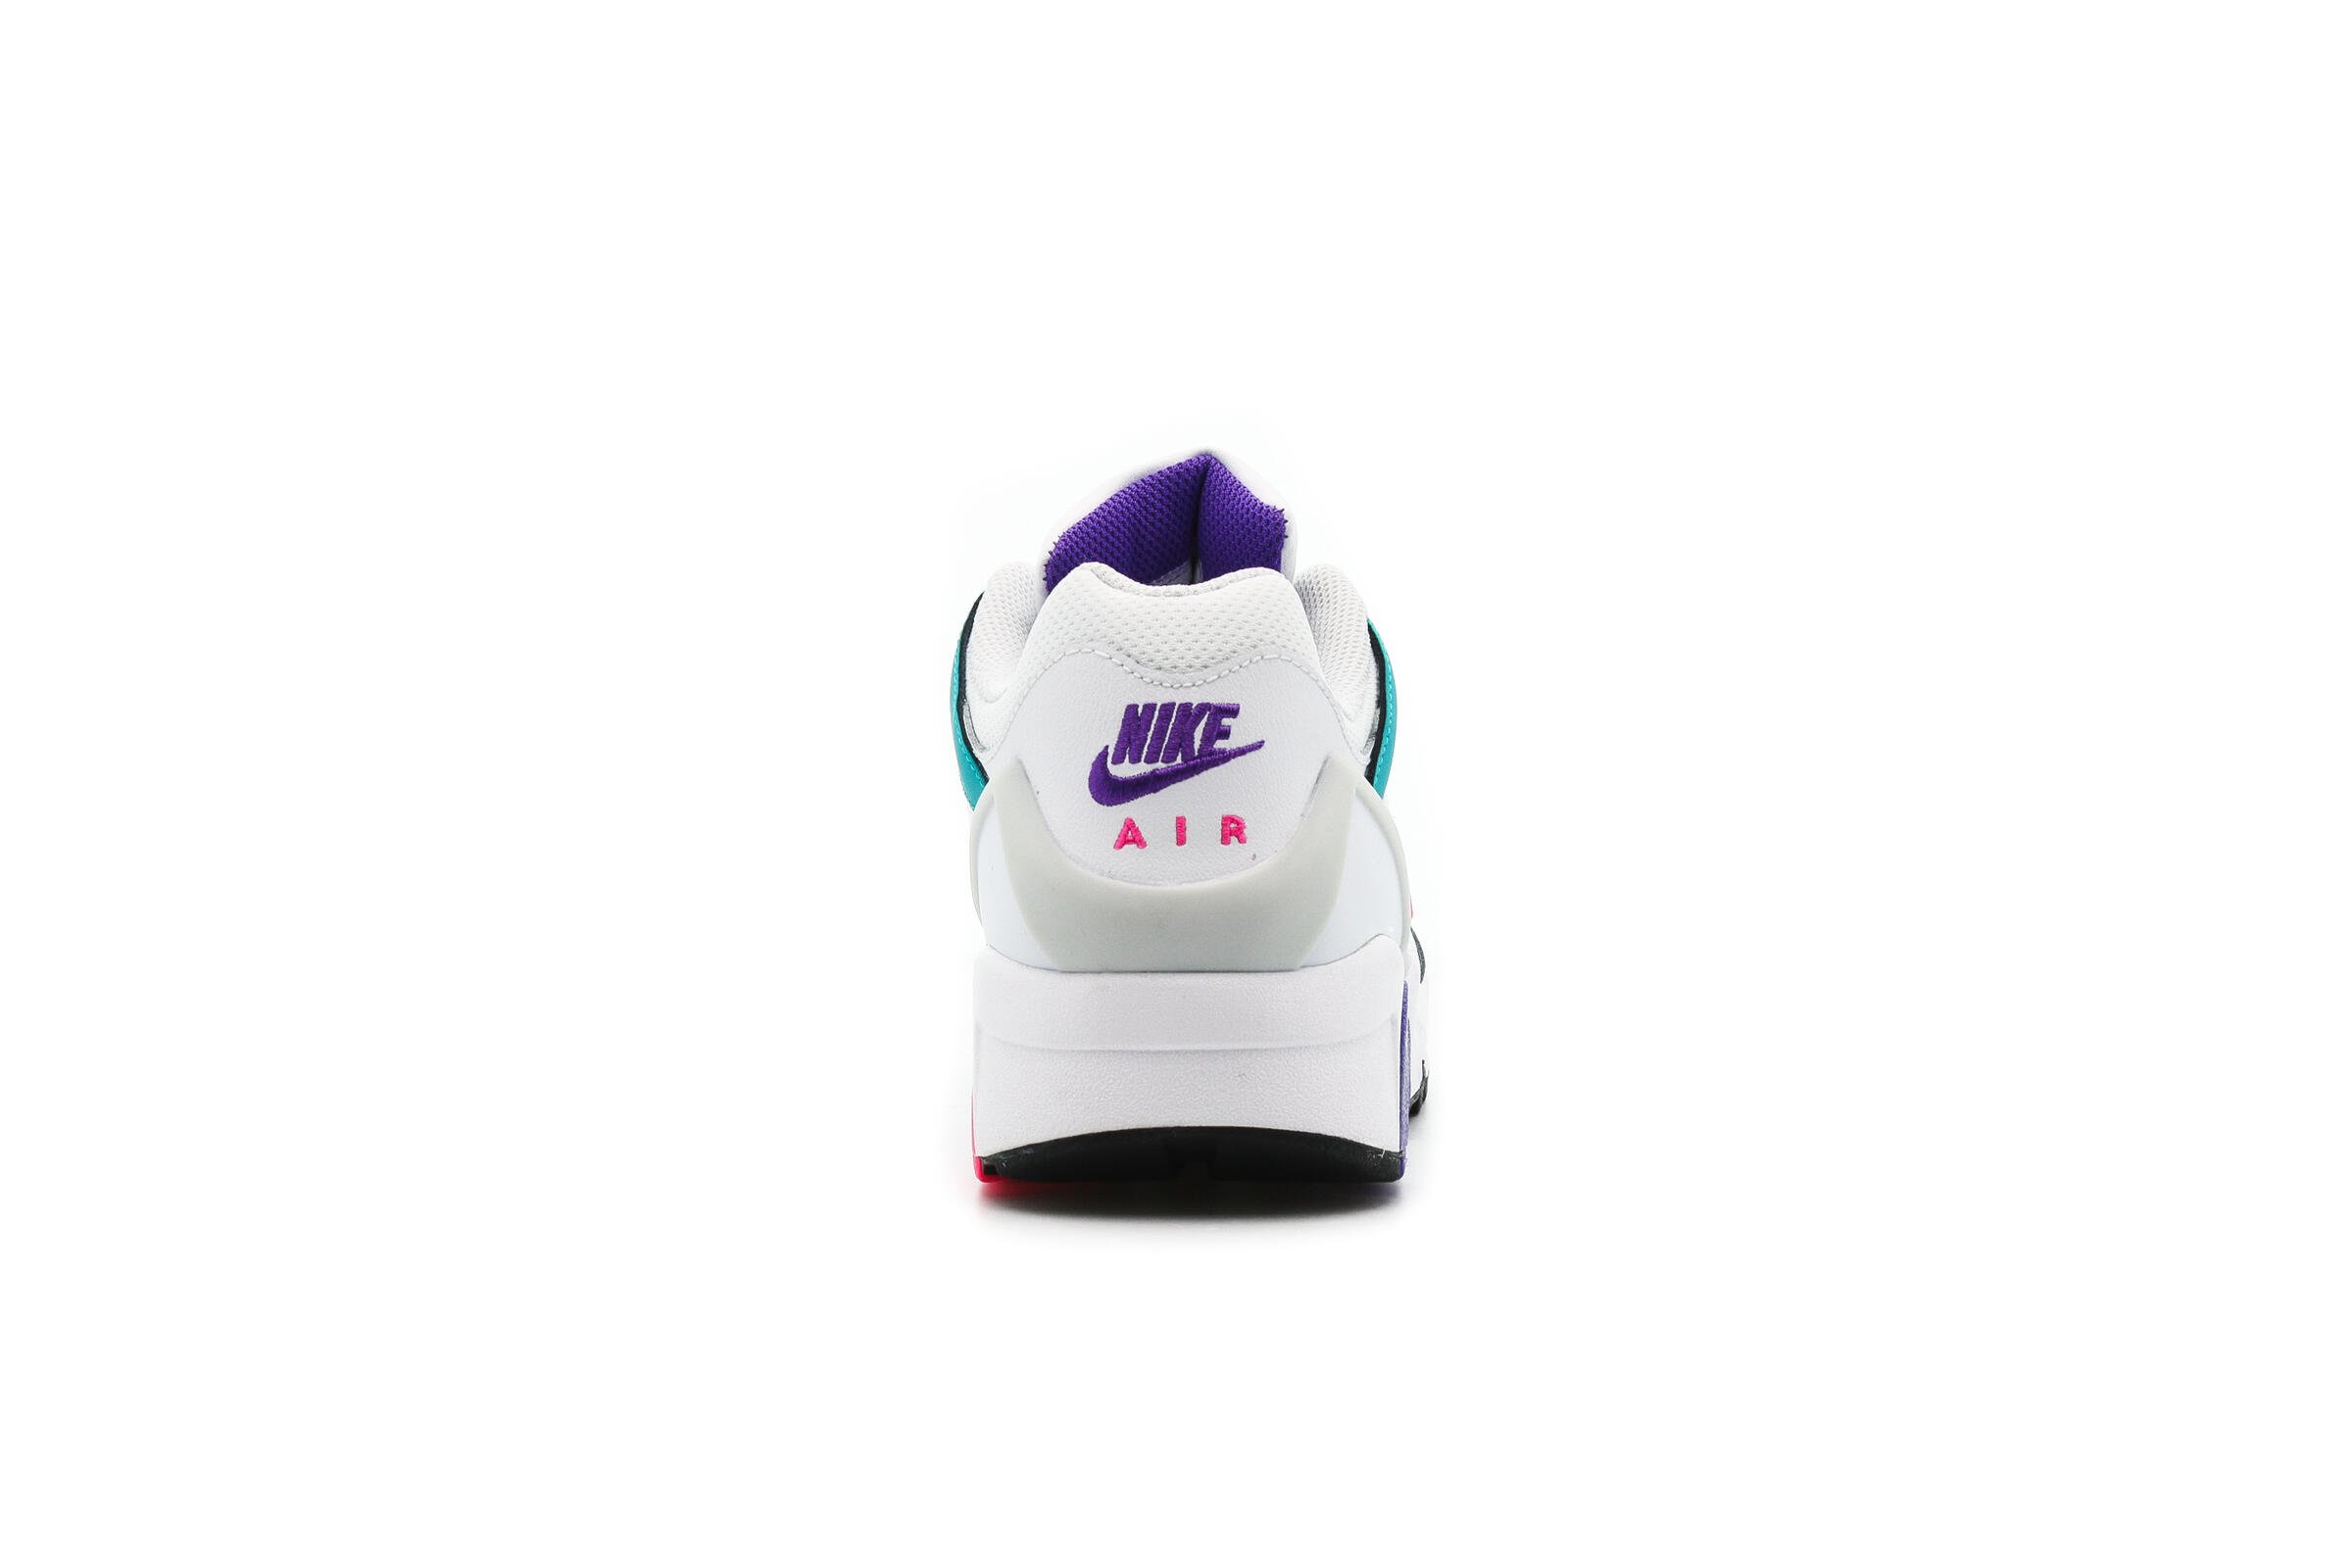 Nike WMNS AIR STRUCTURE "WHITE"